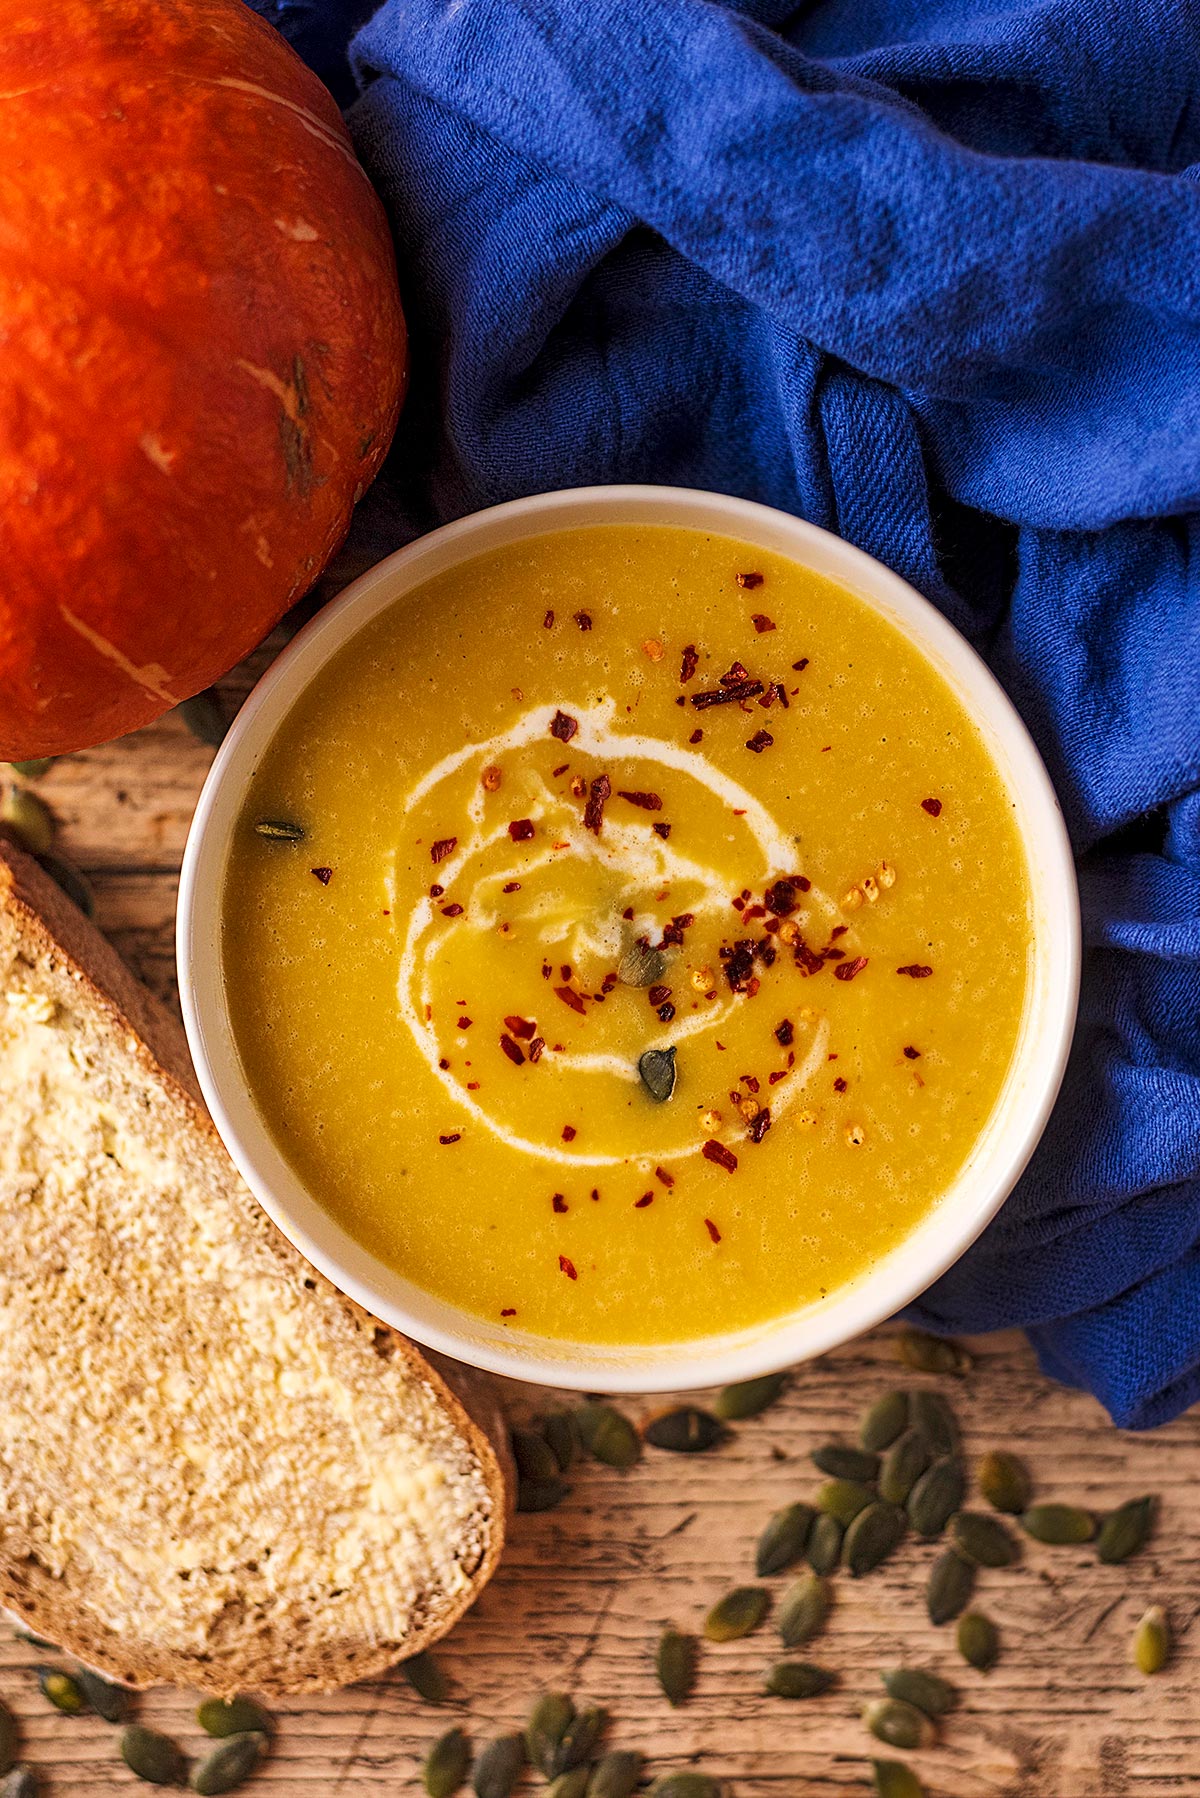 A bowl of pumpkin soup next to a whole pumpkin and a slice of buttered bread.